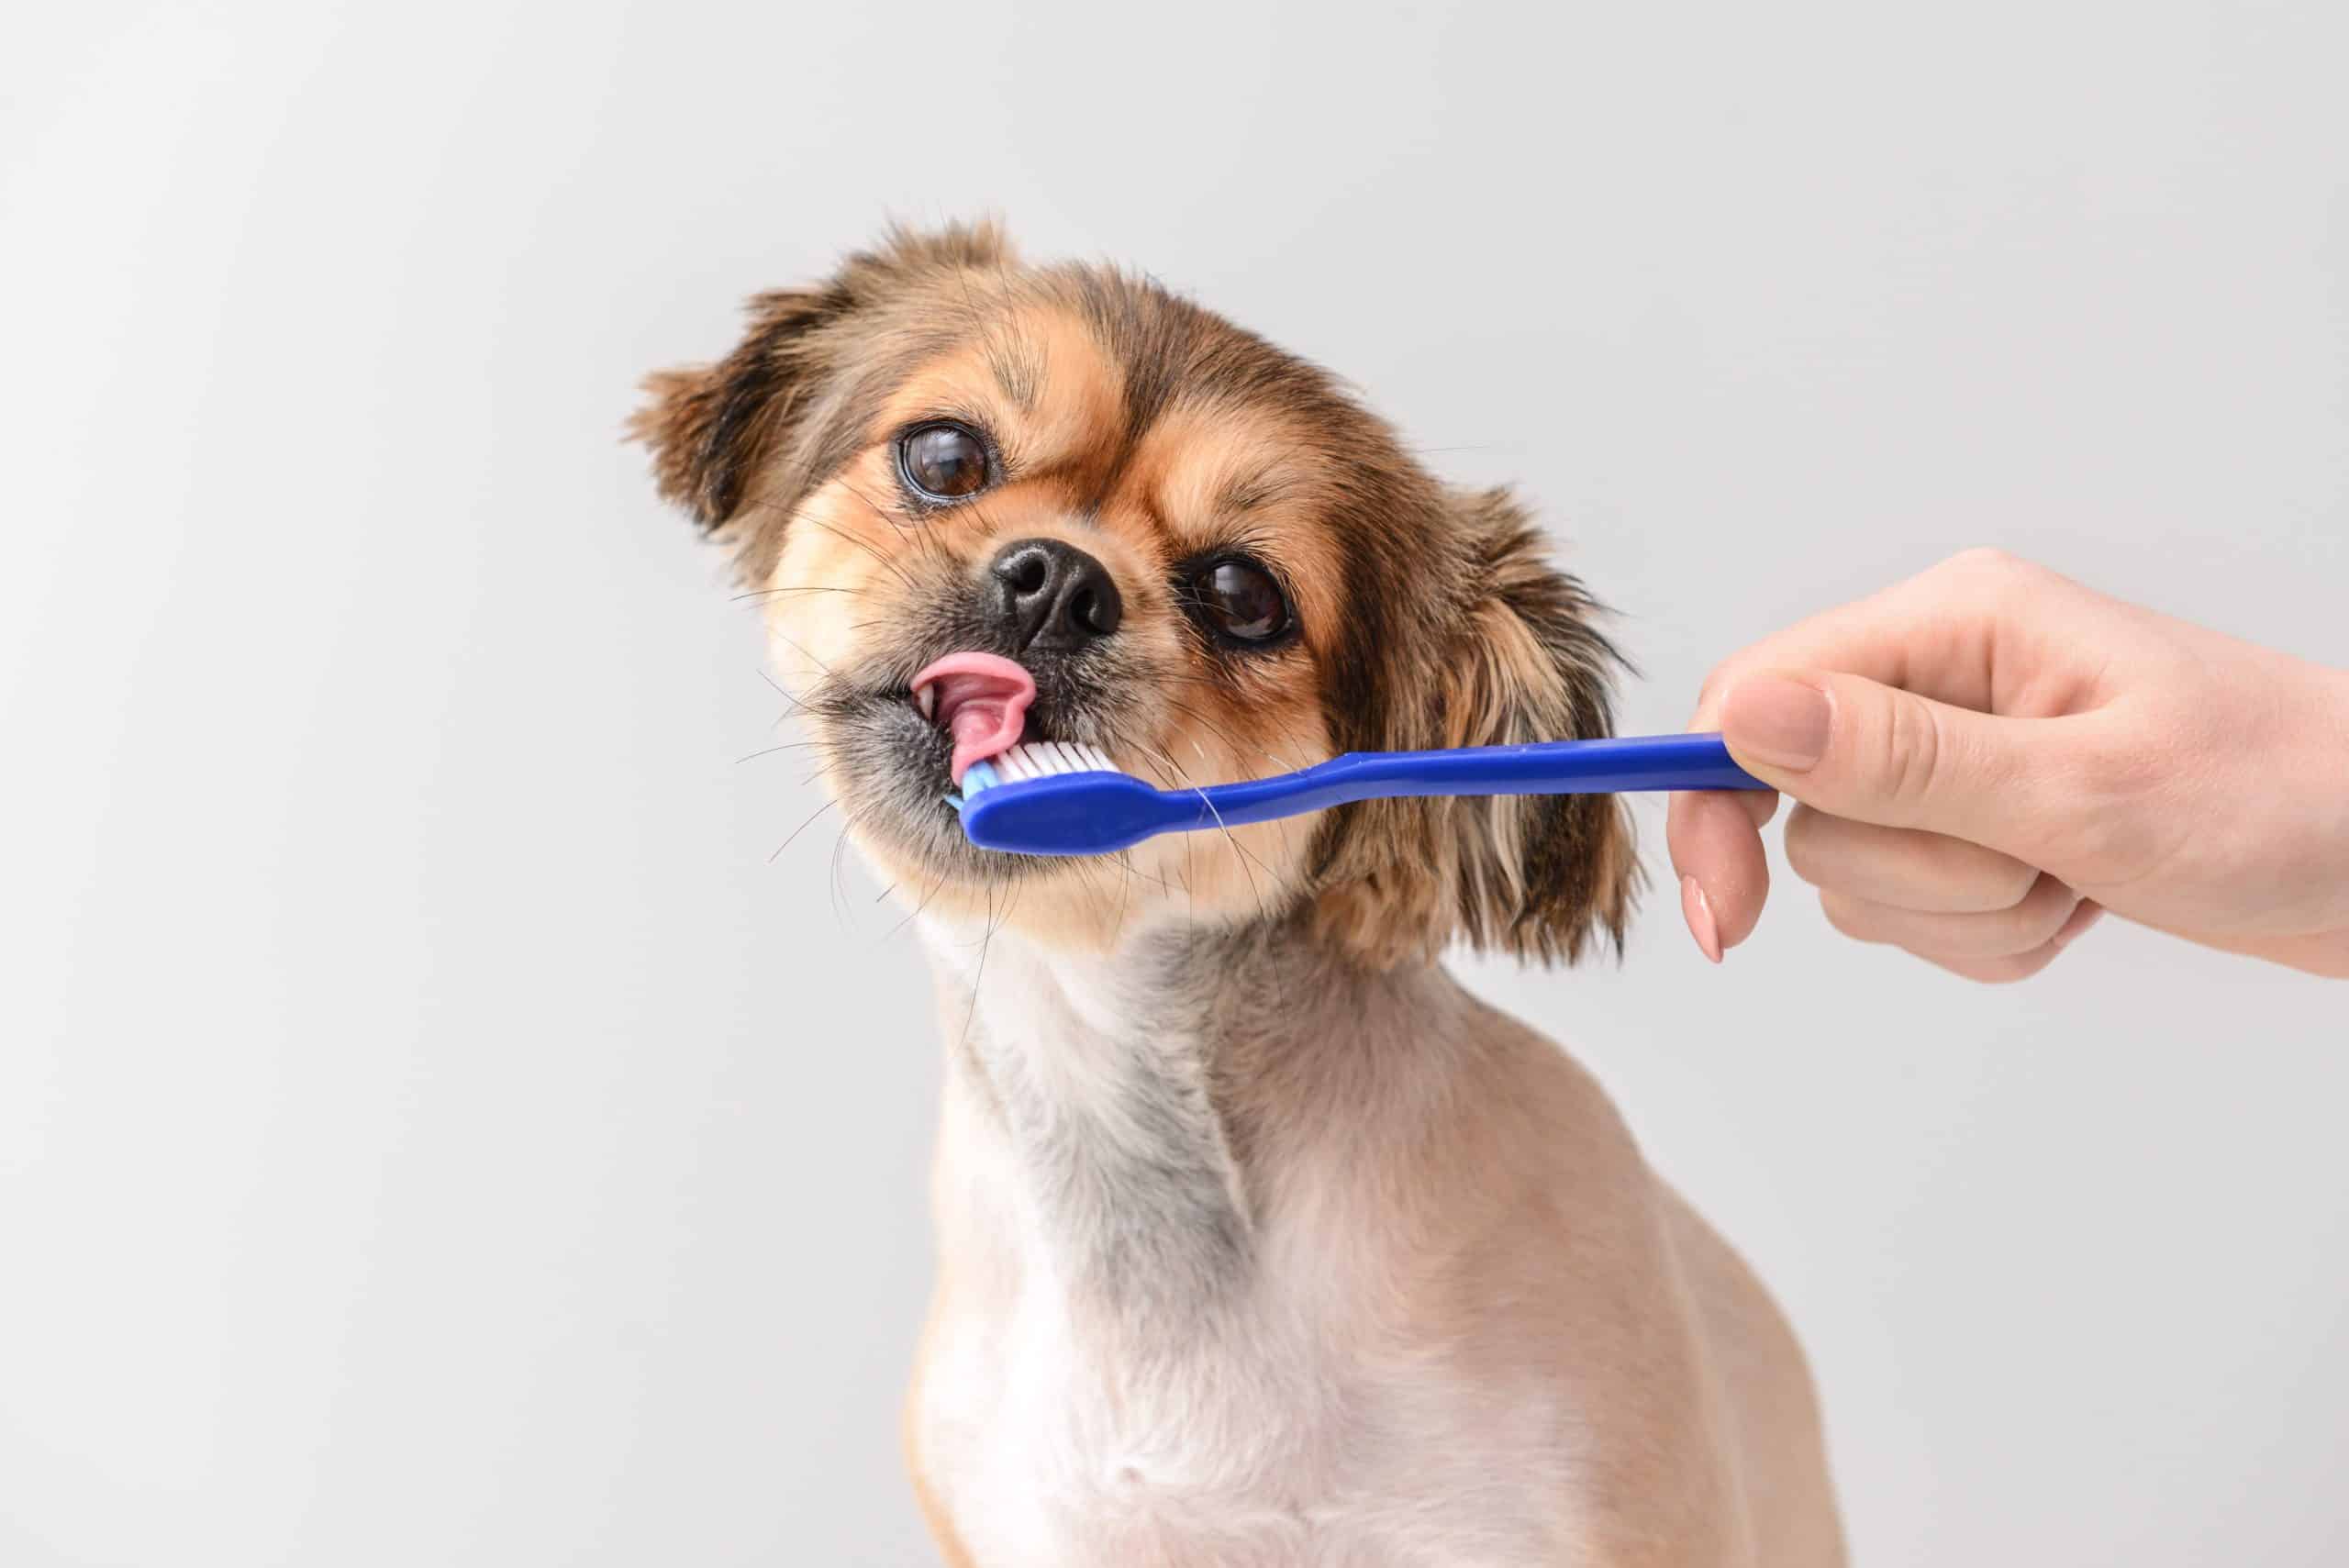 Owner brushes dog's teeth. The good news is that you can take care of your senior dog’s teeth and gums and make a few minor adjustments to their diet in order to greatly improve their quality of life.